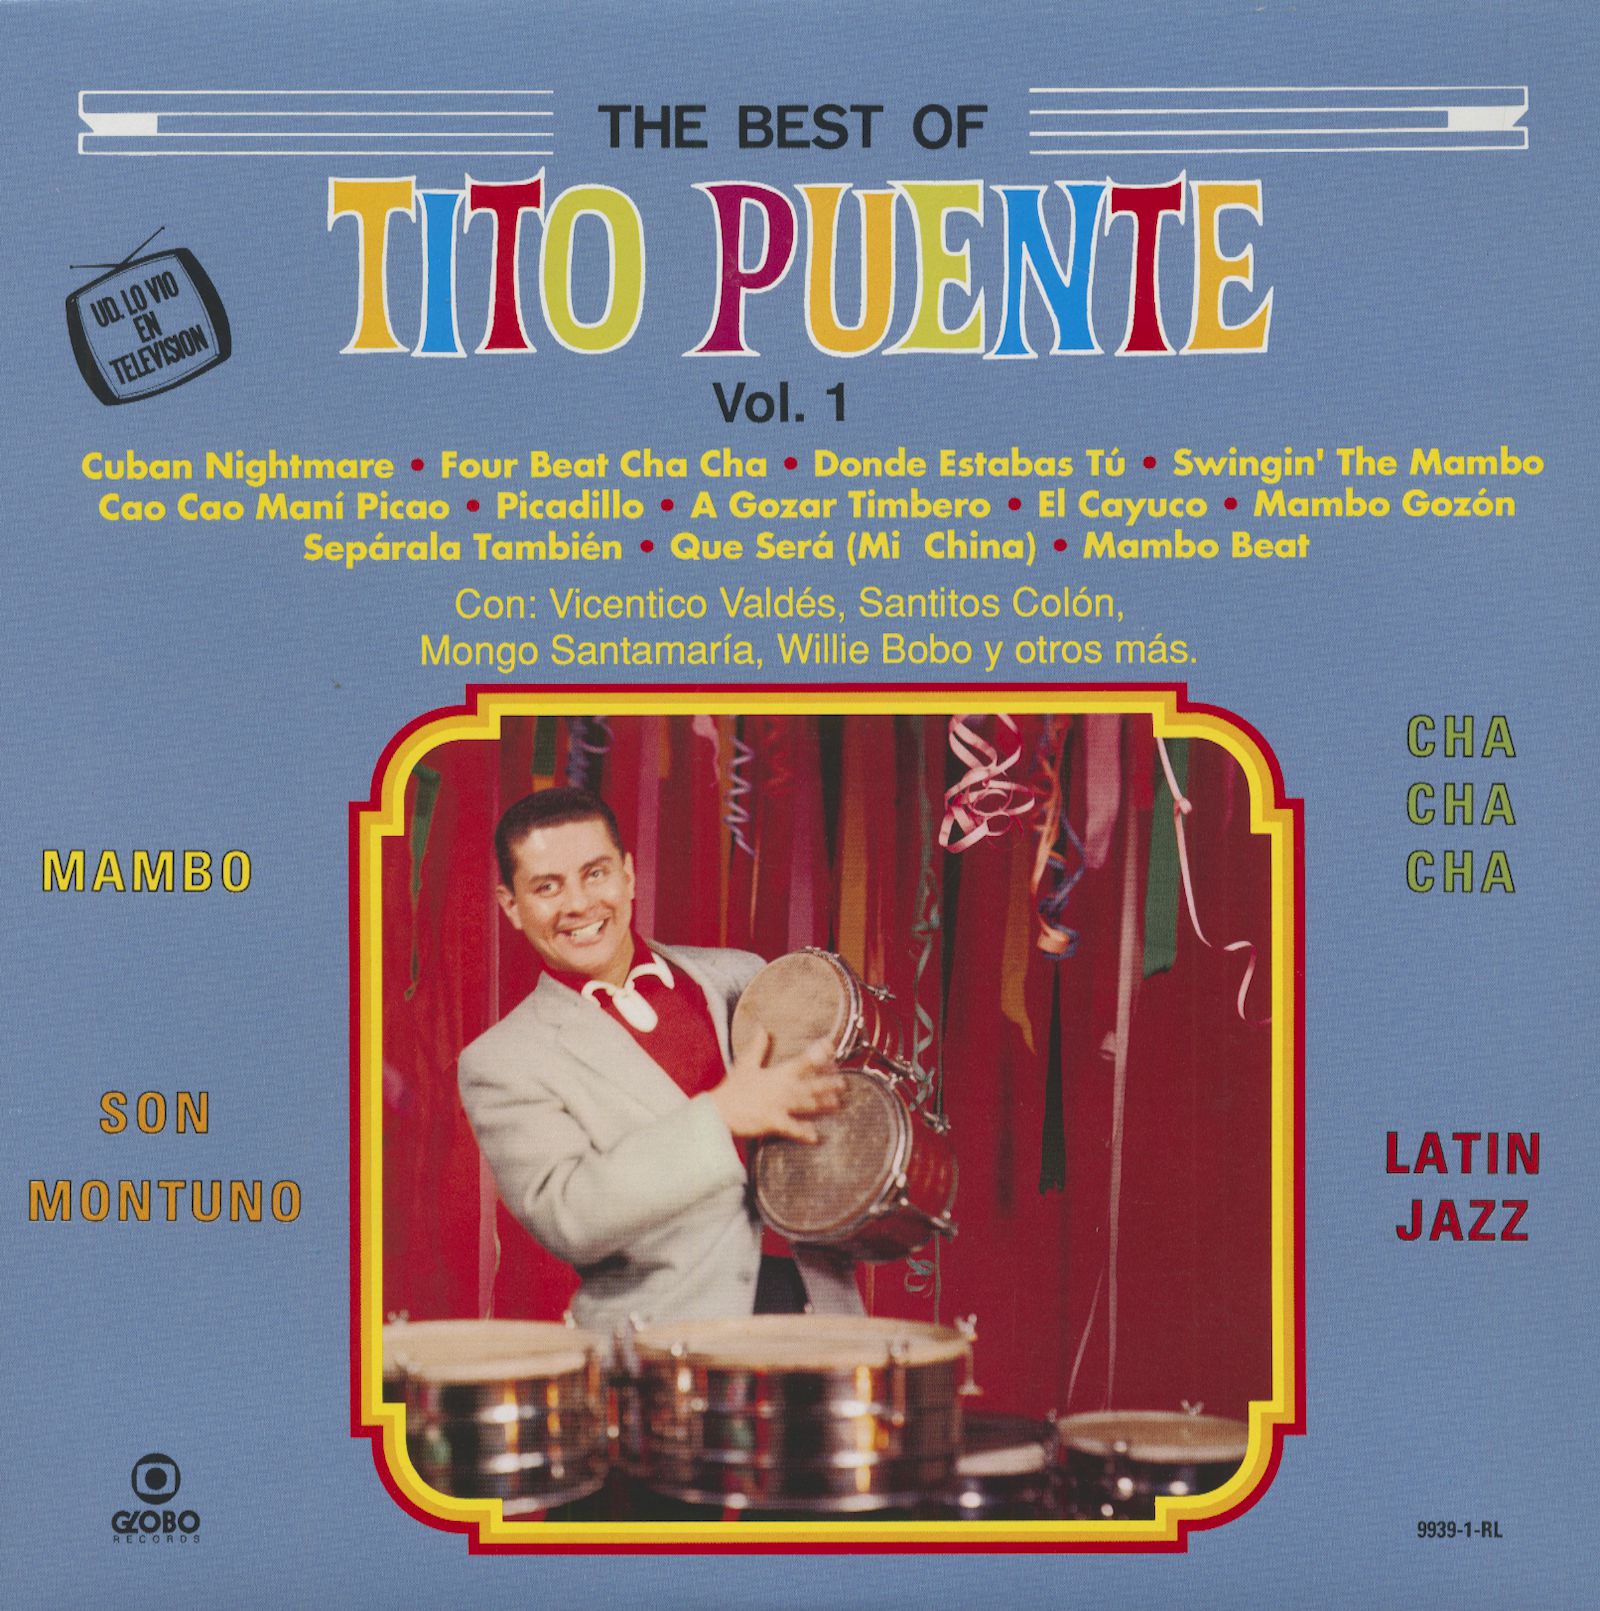 Tito Puente LP: The Best Of Vol.1 - Bear Family Records